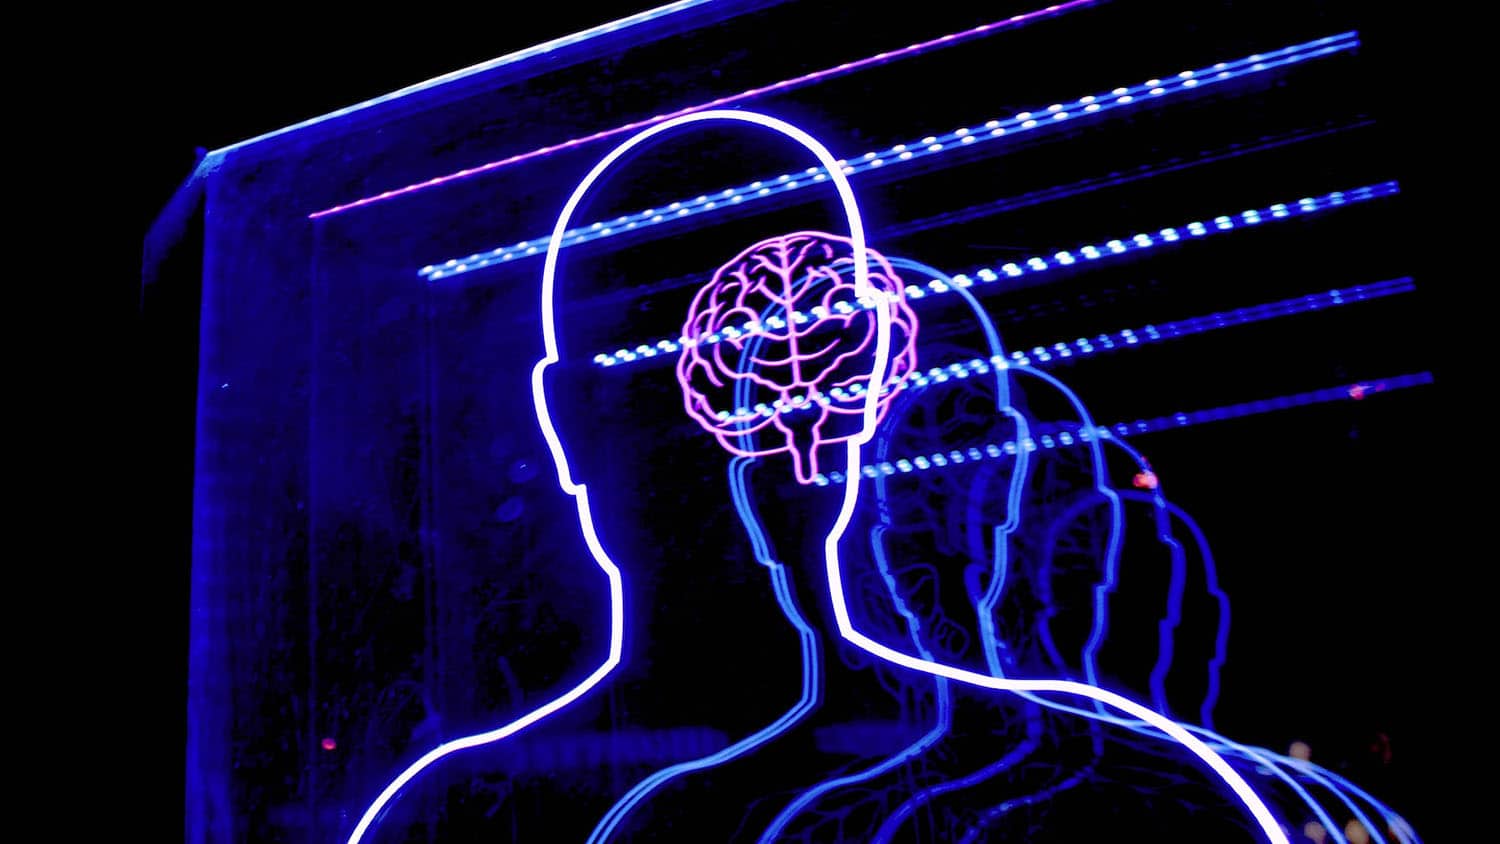 neon lights show the outline of the human body overlayed with an outline of the brain